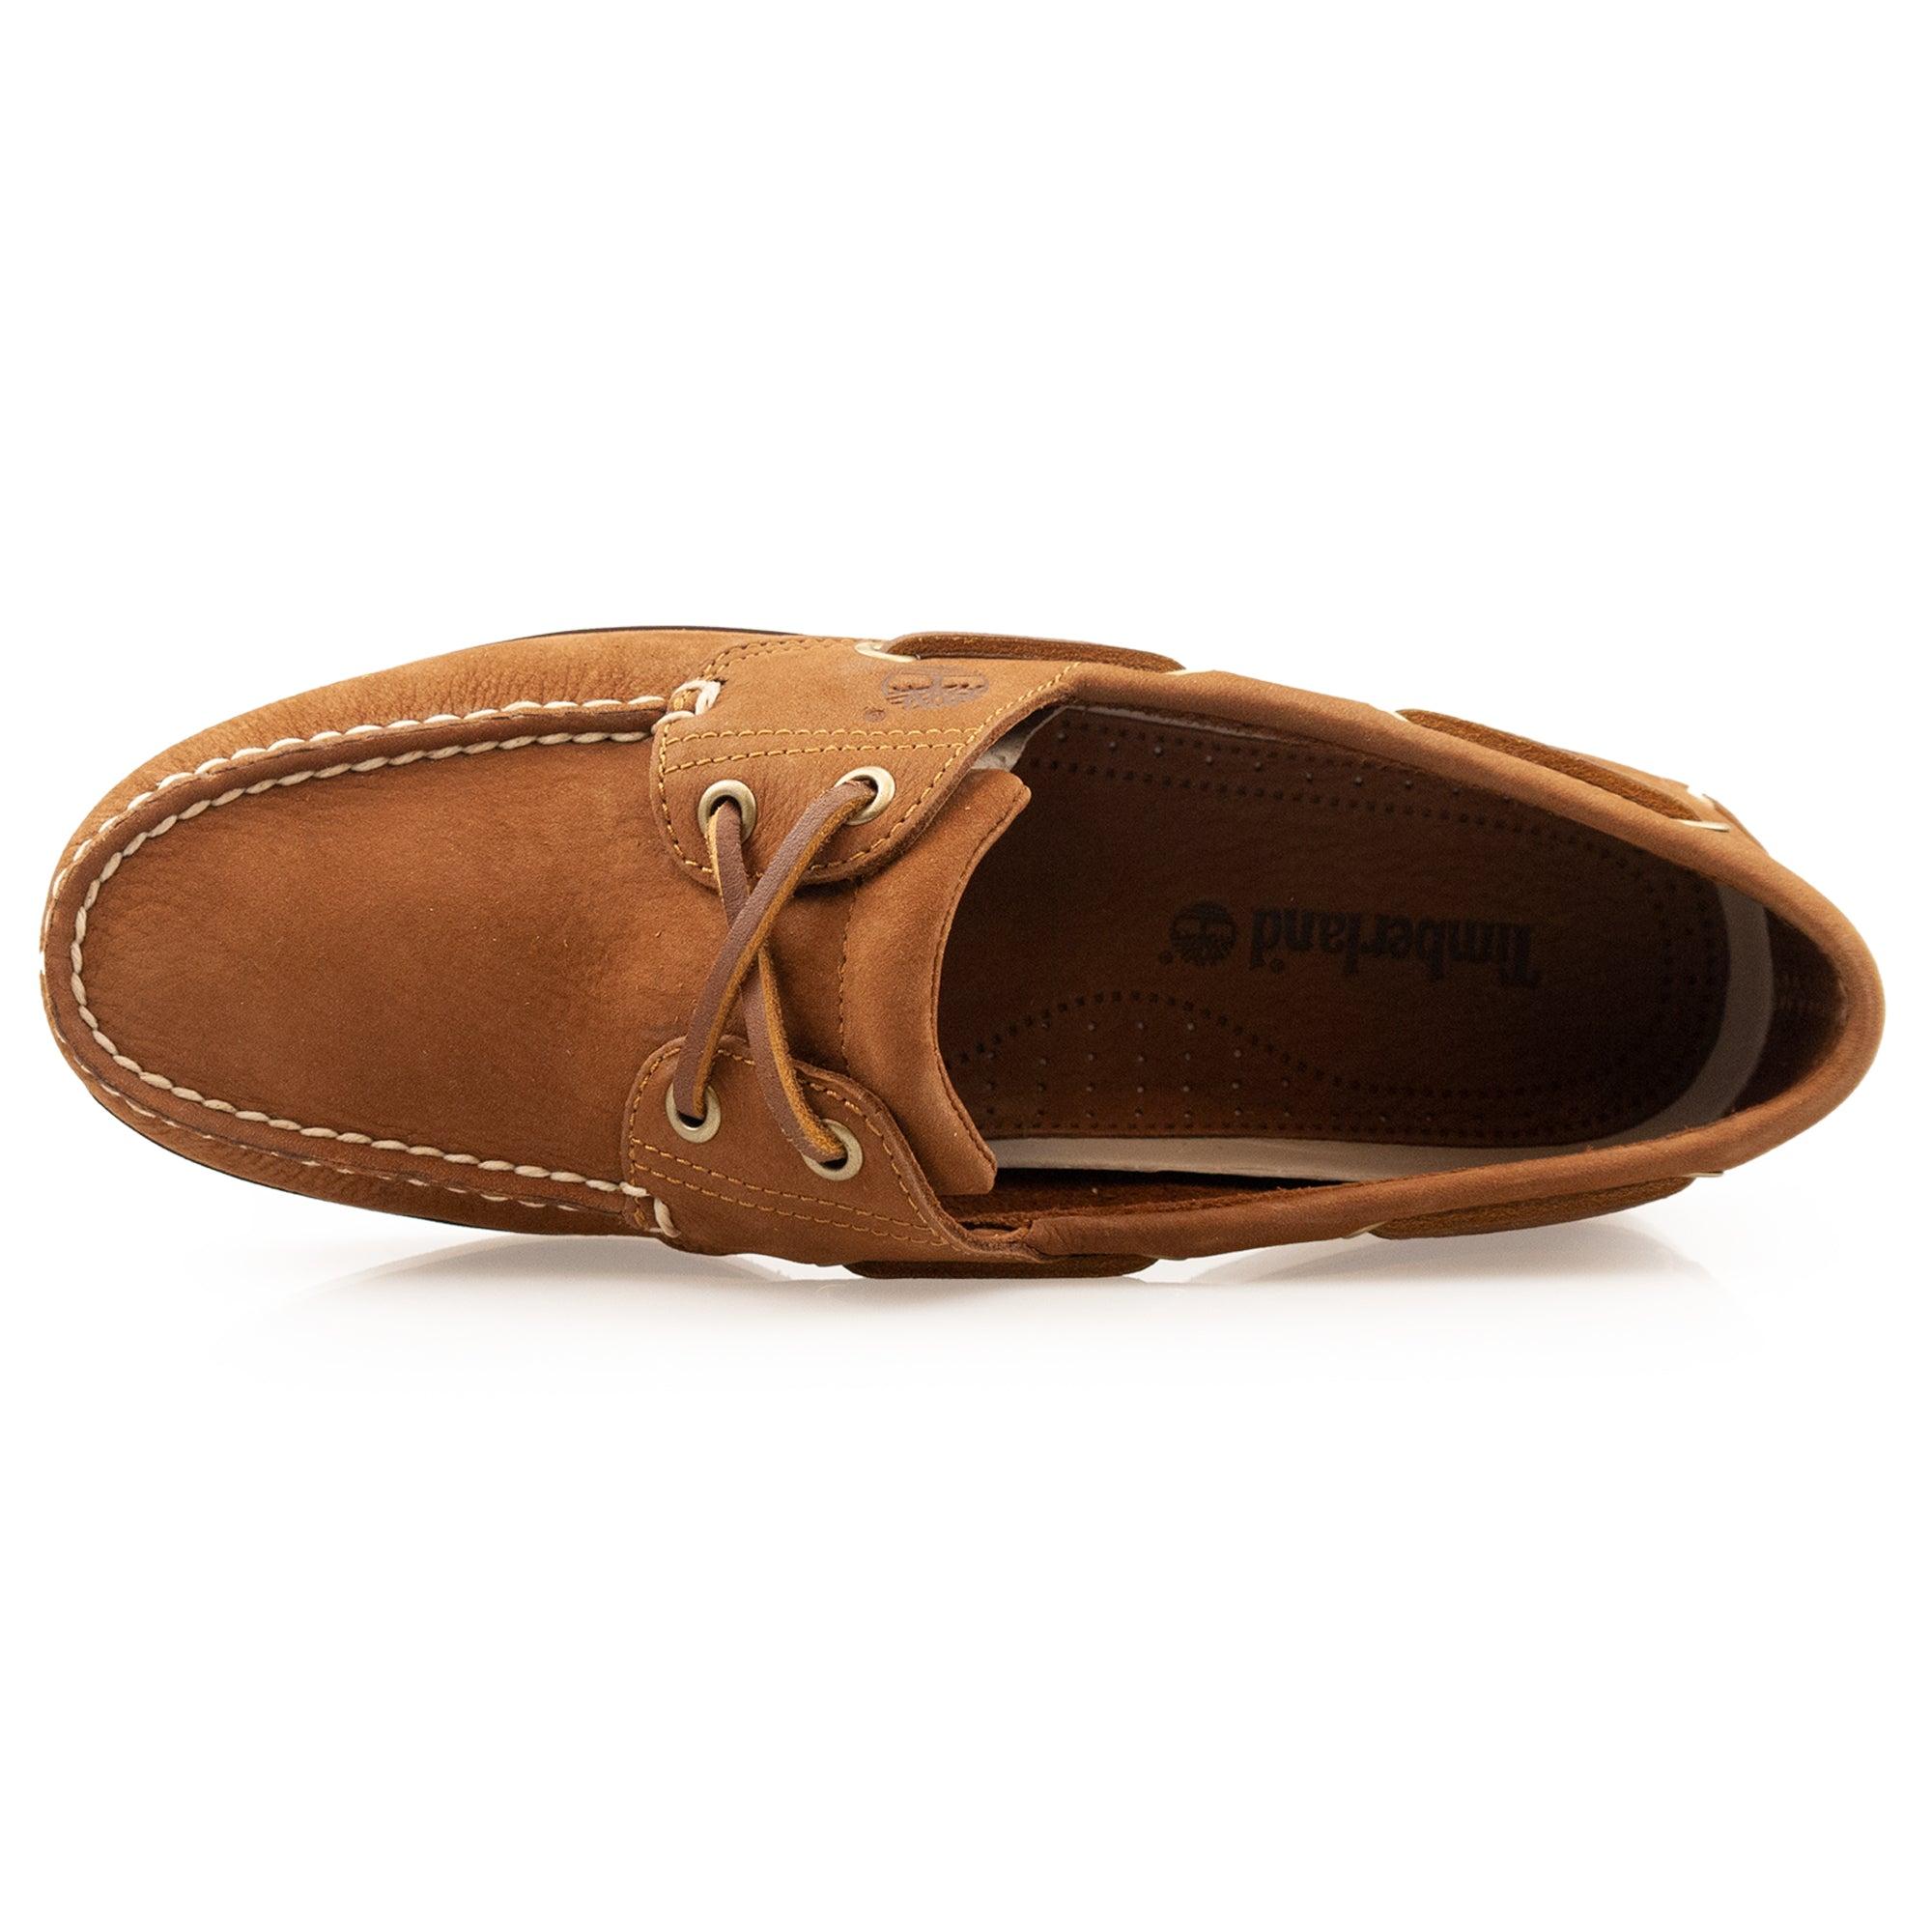 Timberland Classic Boat A 43 1 Rust Nubuck in Brown | Lyst